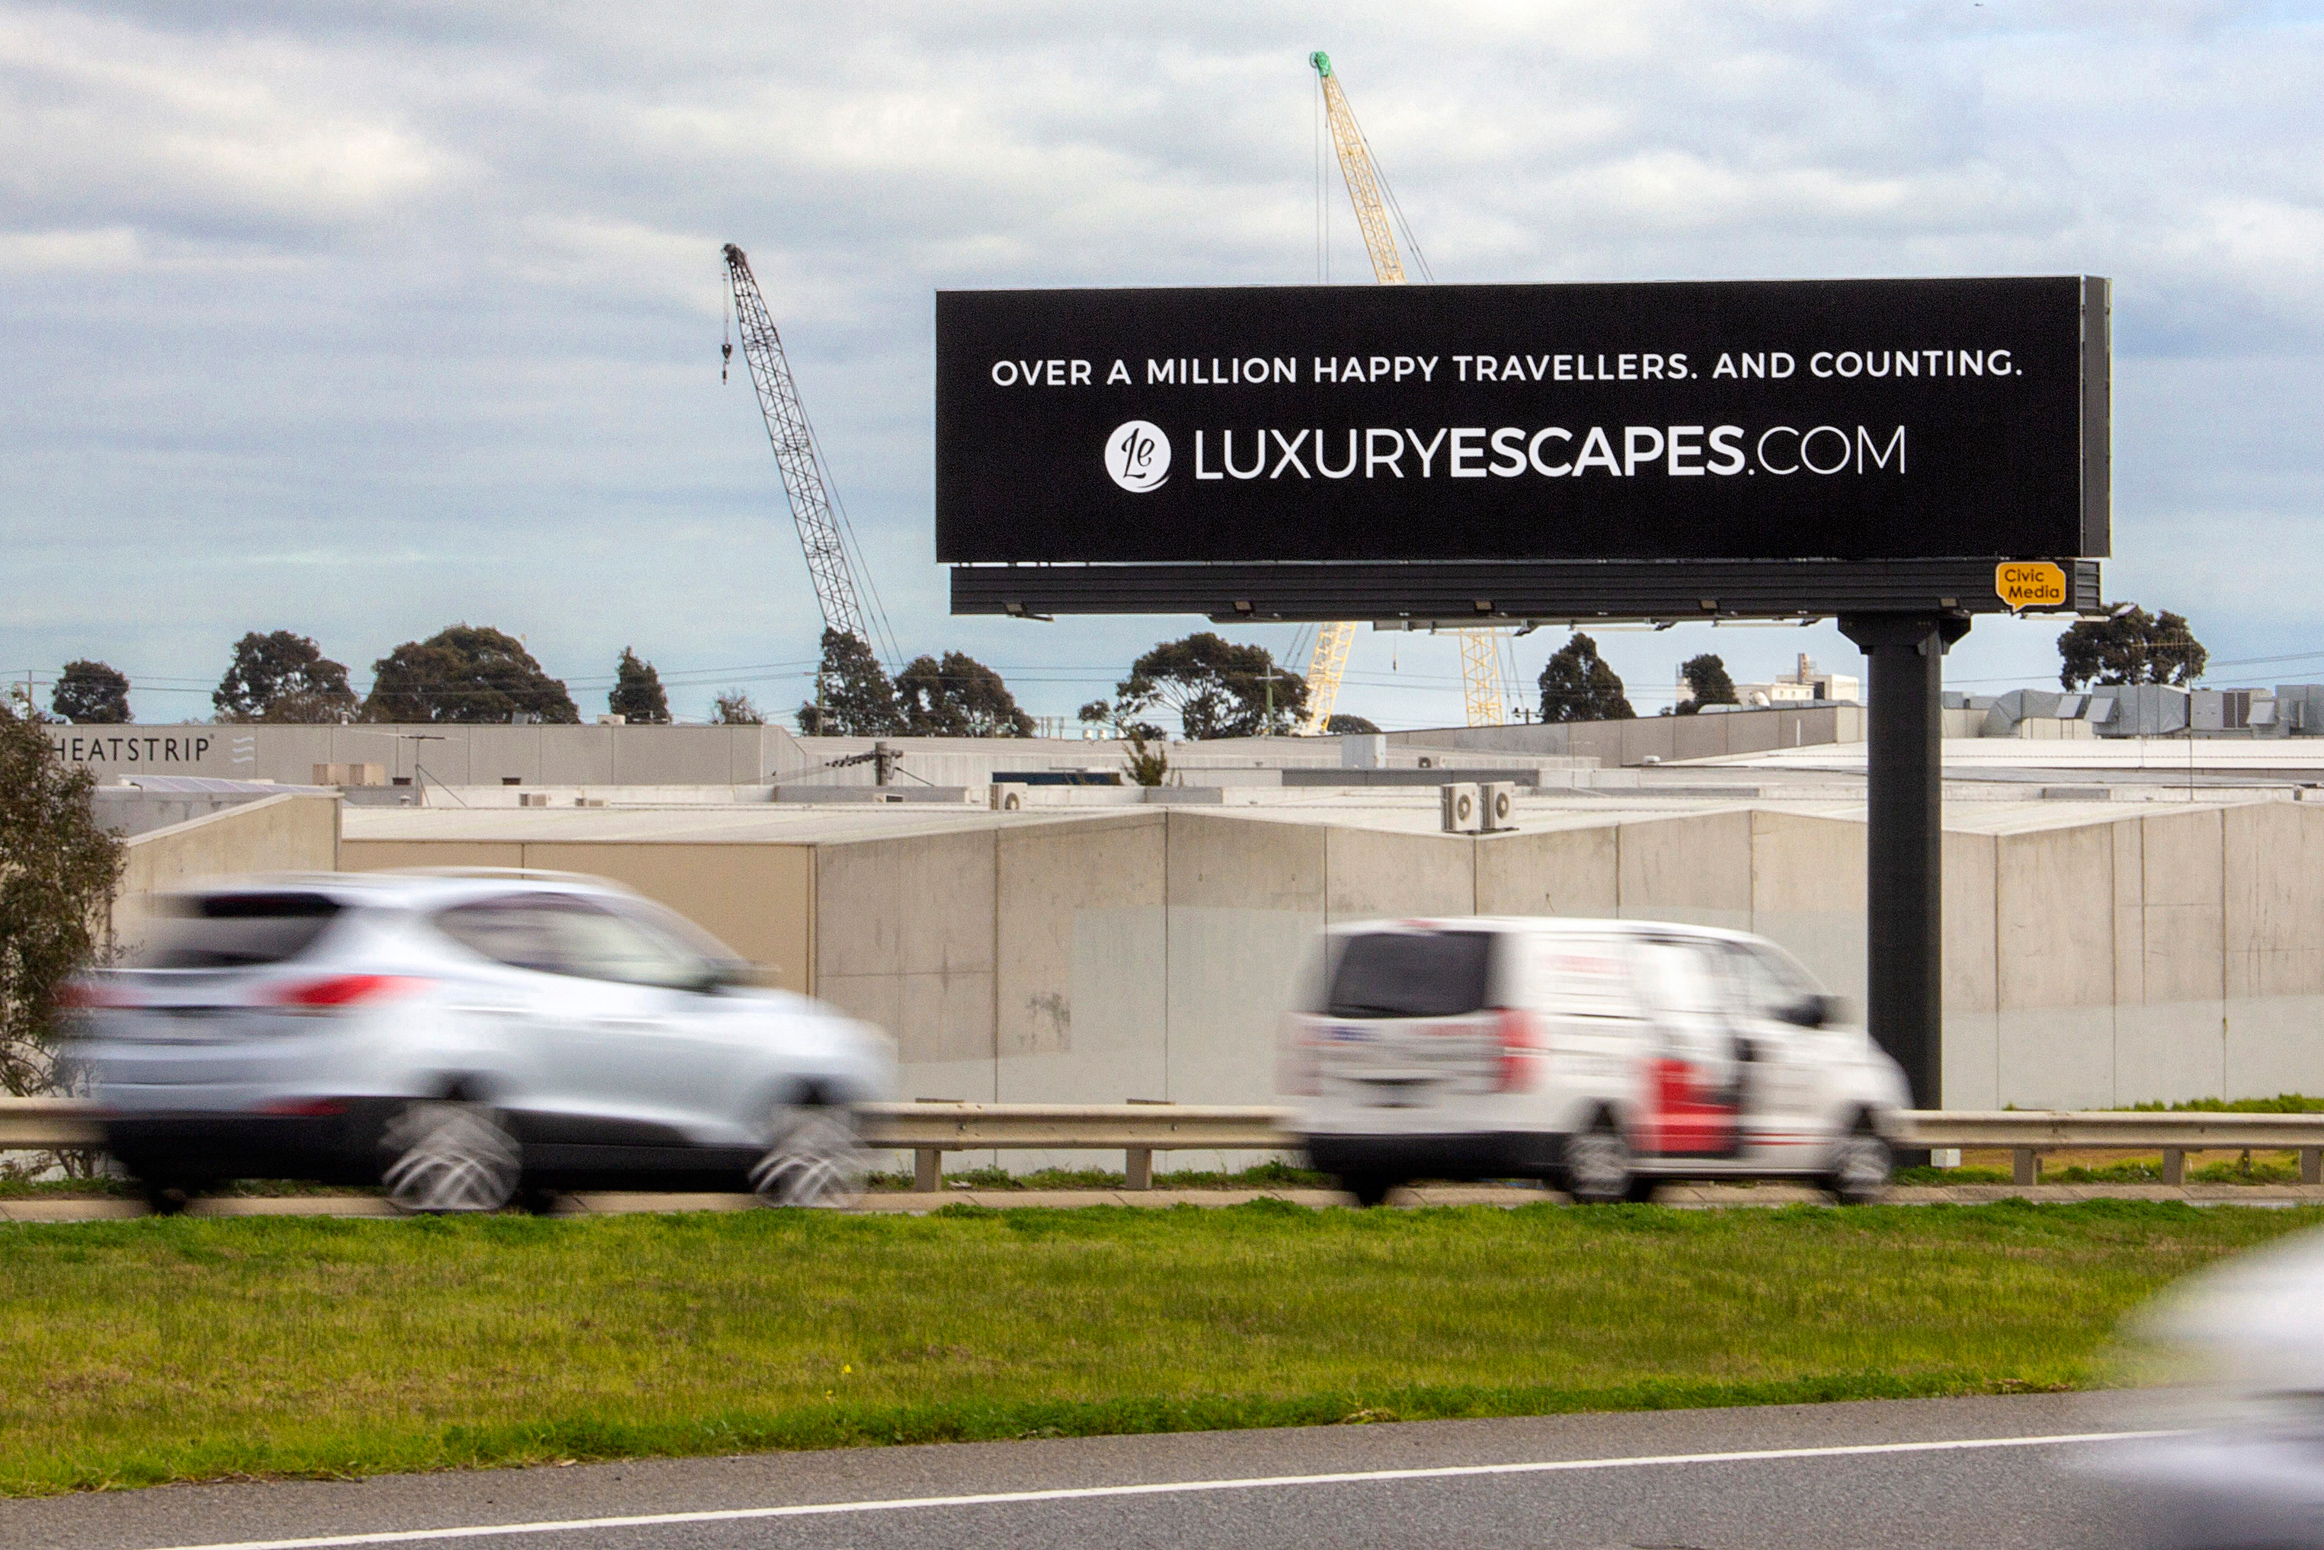 A spectacular classic billboard in Melbourne's outer suburbs